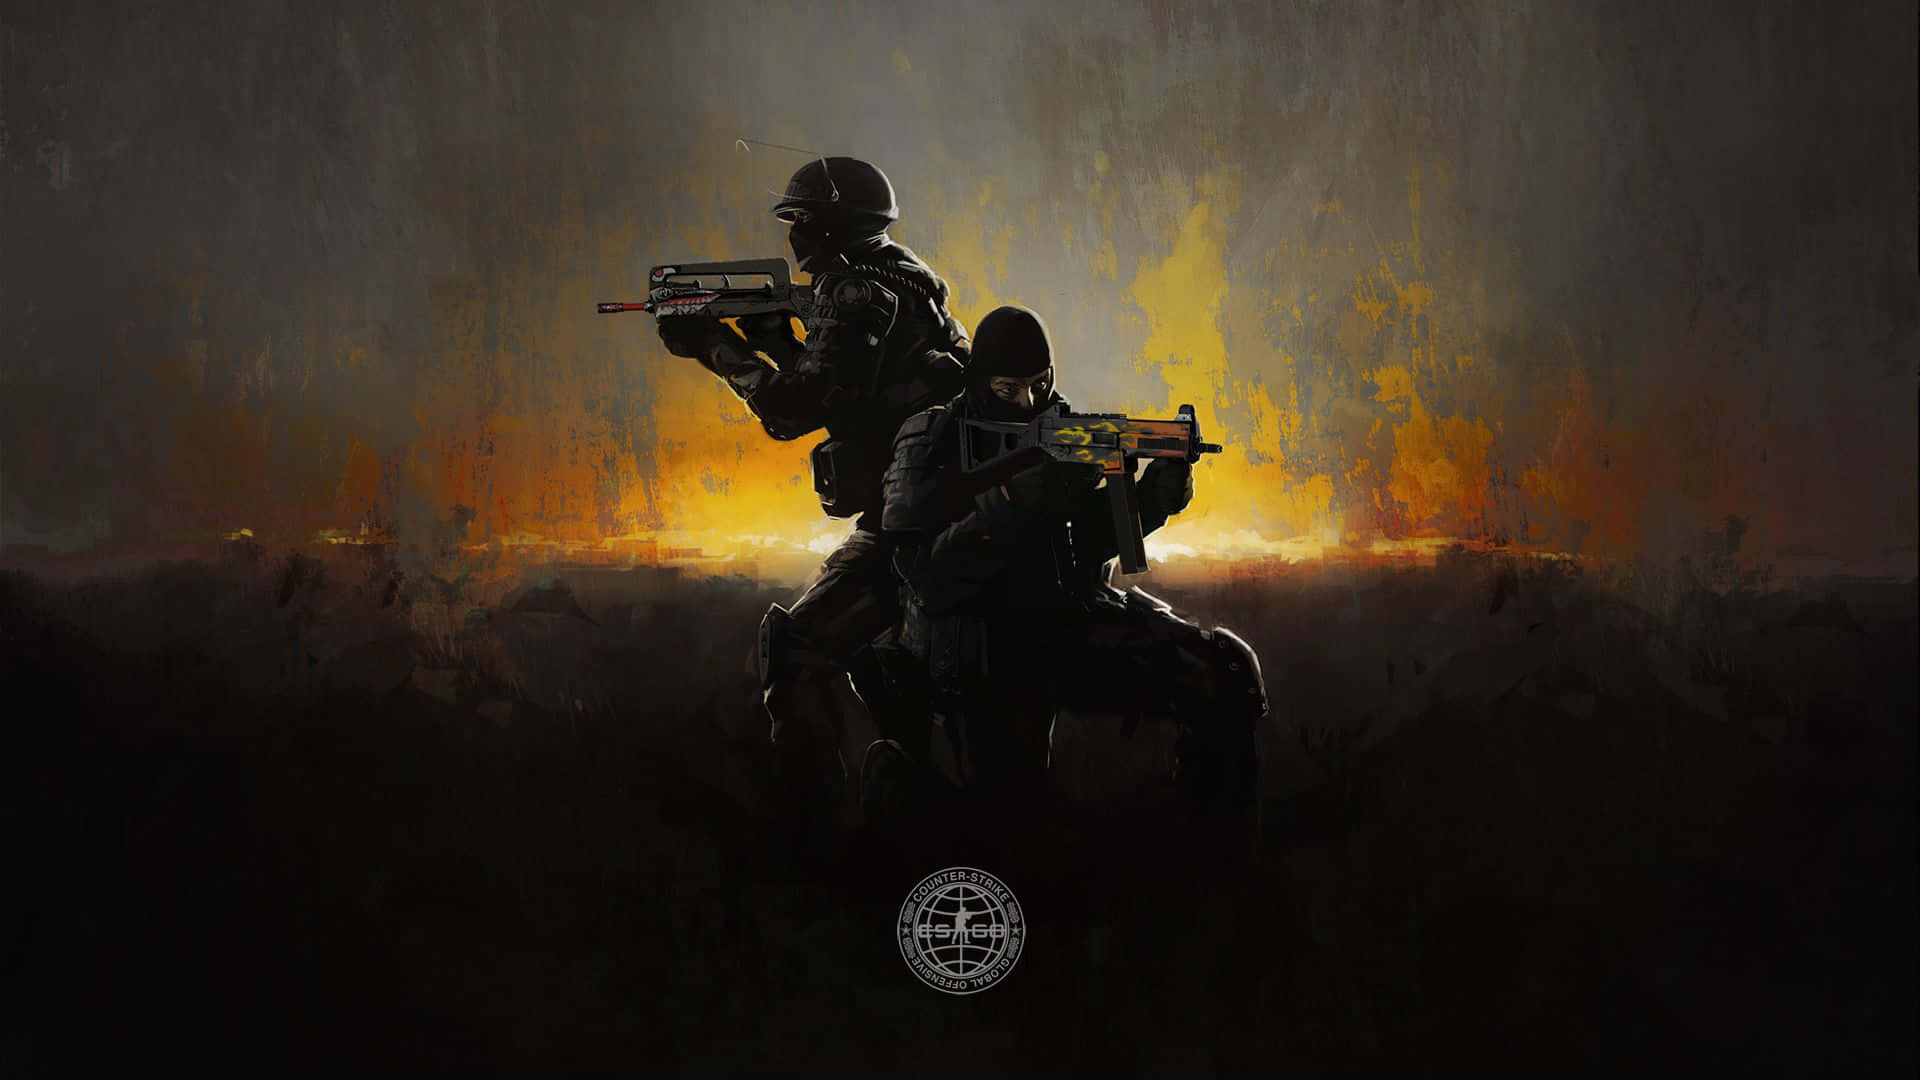 Get ready to play Counter-Strike: Global Offensive with our amazing graphic wallpaper